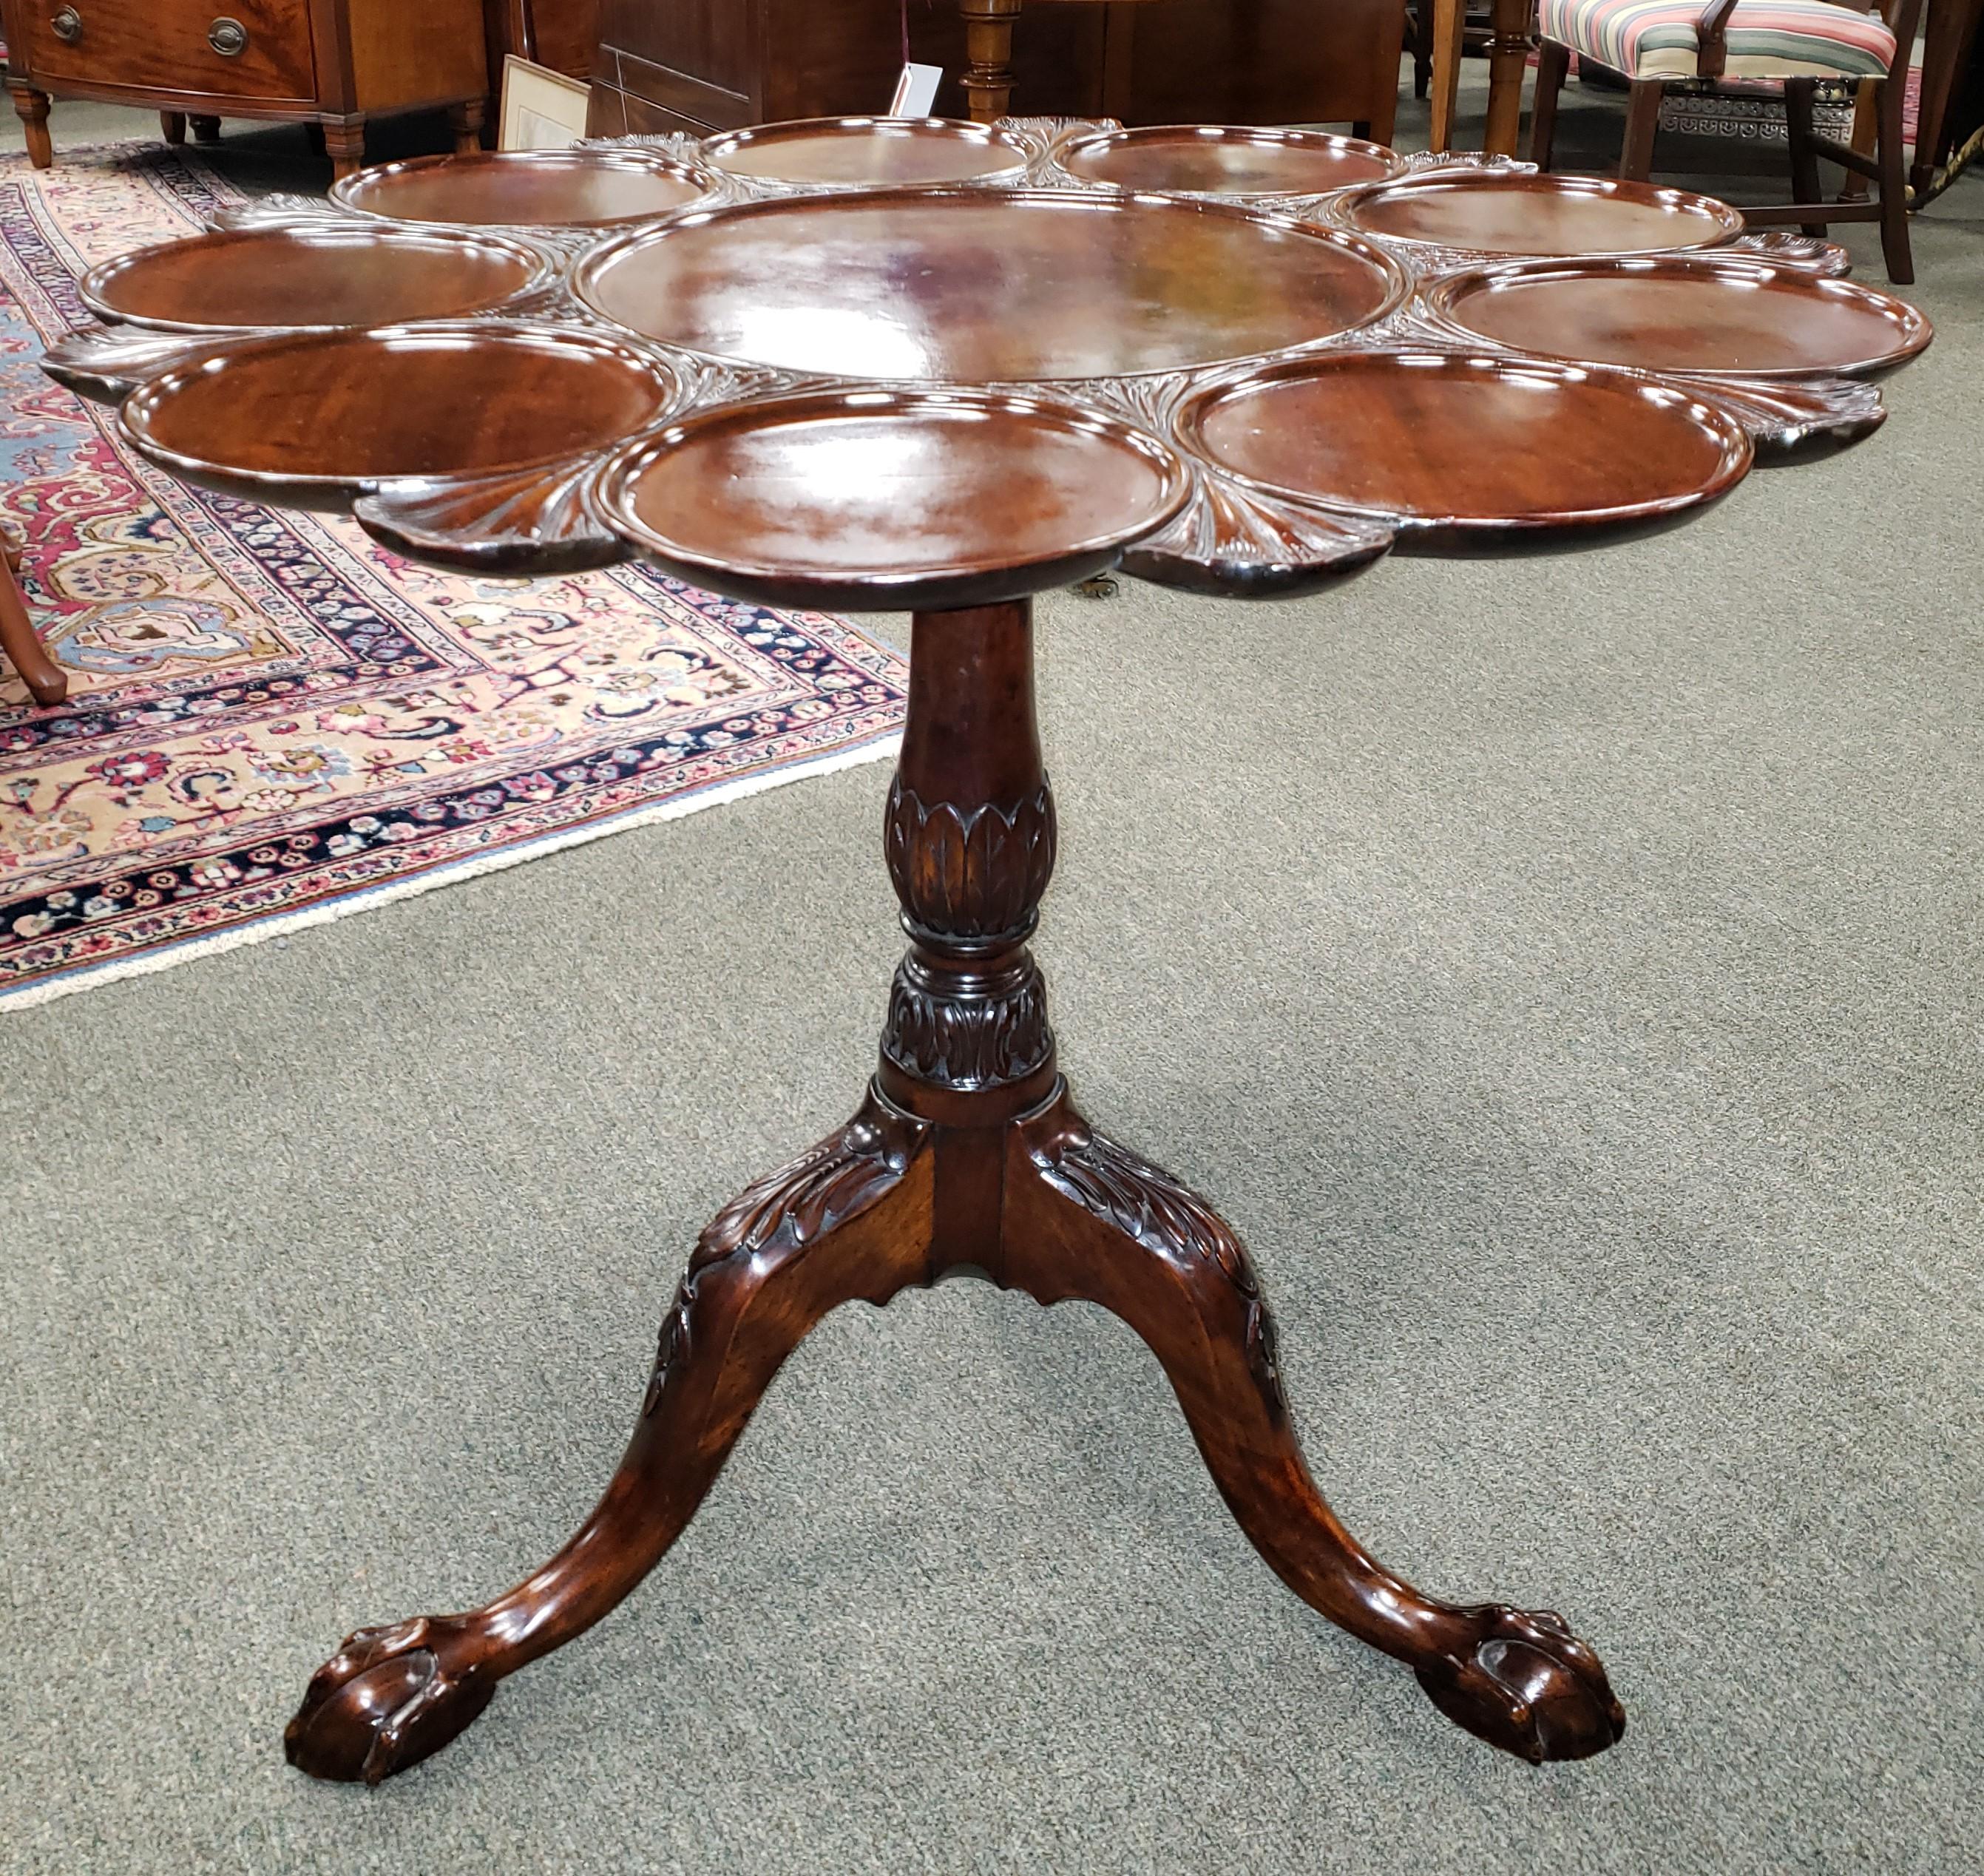 Rare and important George III English carved mahogany Chippendale style tilt top supper table. This rare and unusual table displays a top with scalloped resting spots for small serving plates and a center spot for a large platter. The elegant top is